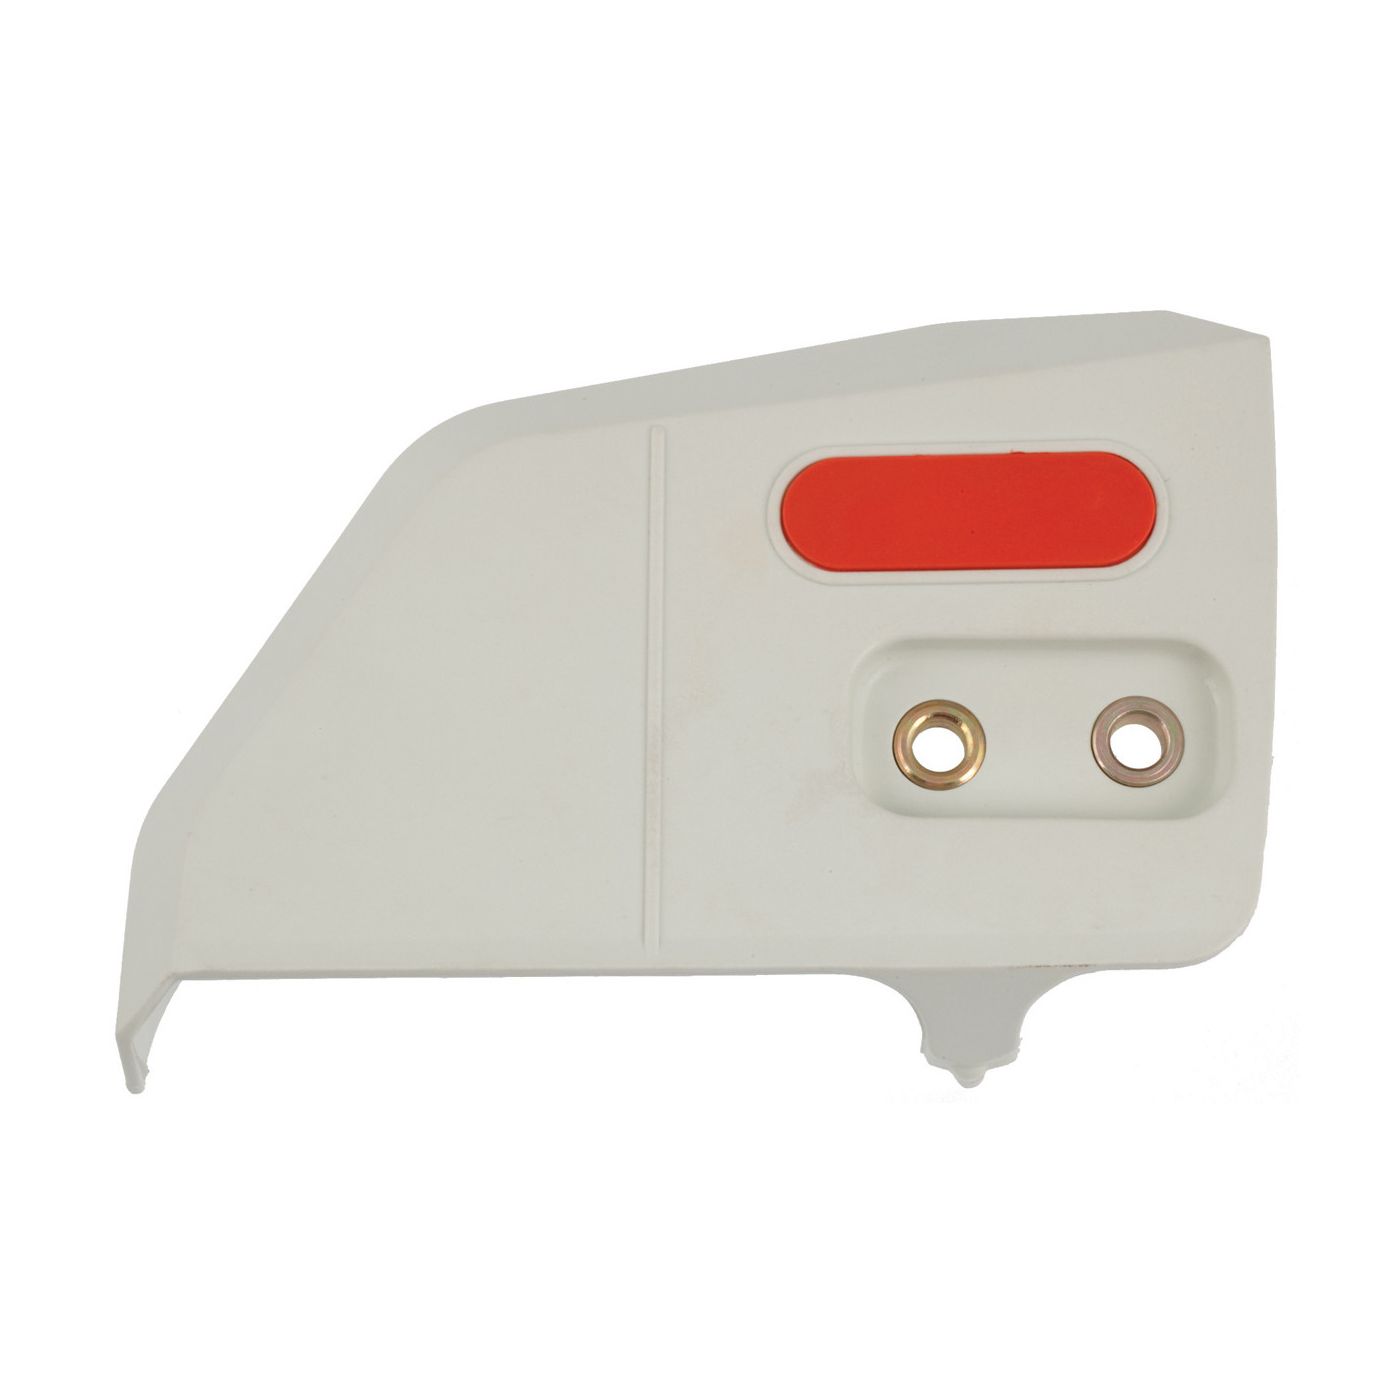 Stihl 017/018/021/023/025/MS180/MS210/MS230/MS250 Chainsaw Sprocket Cover 1123 640 1705